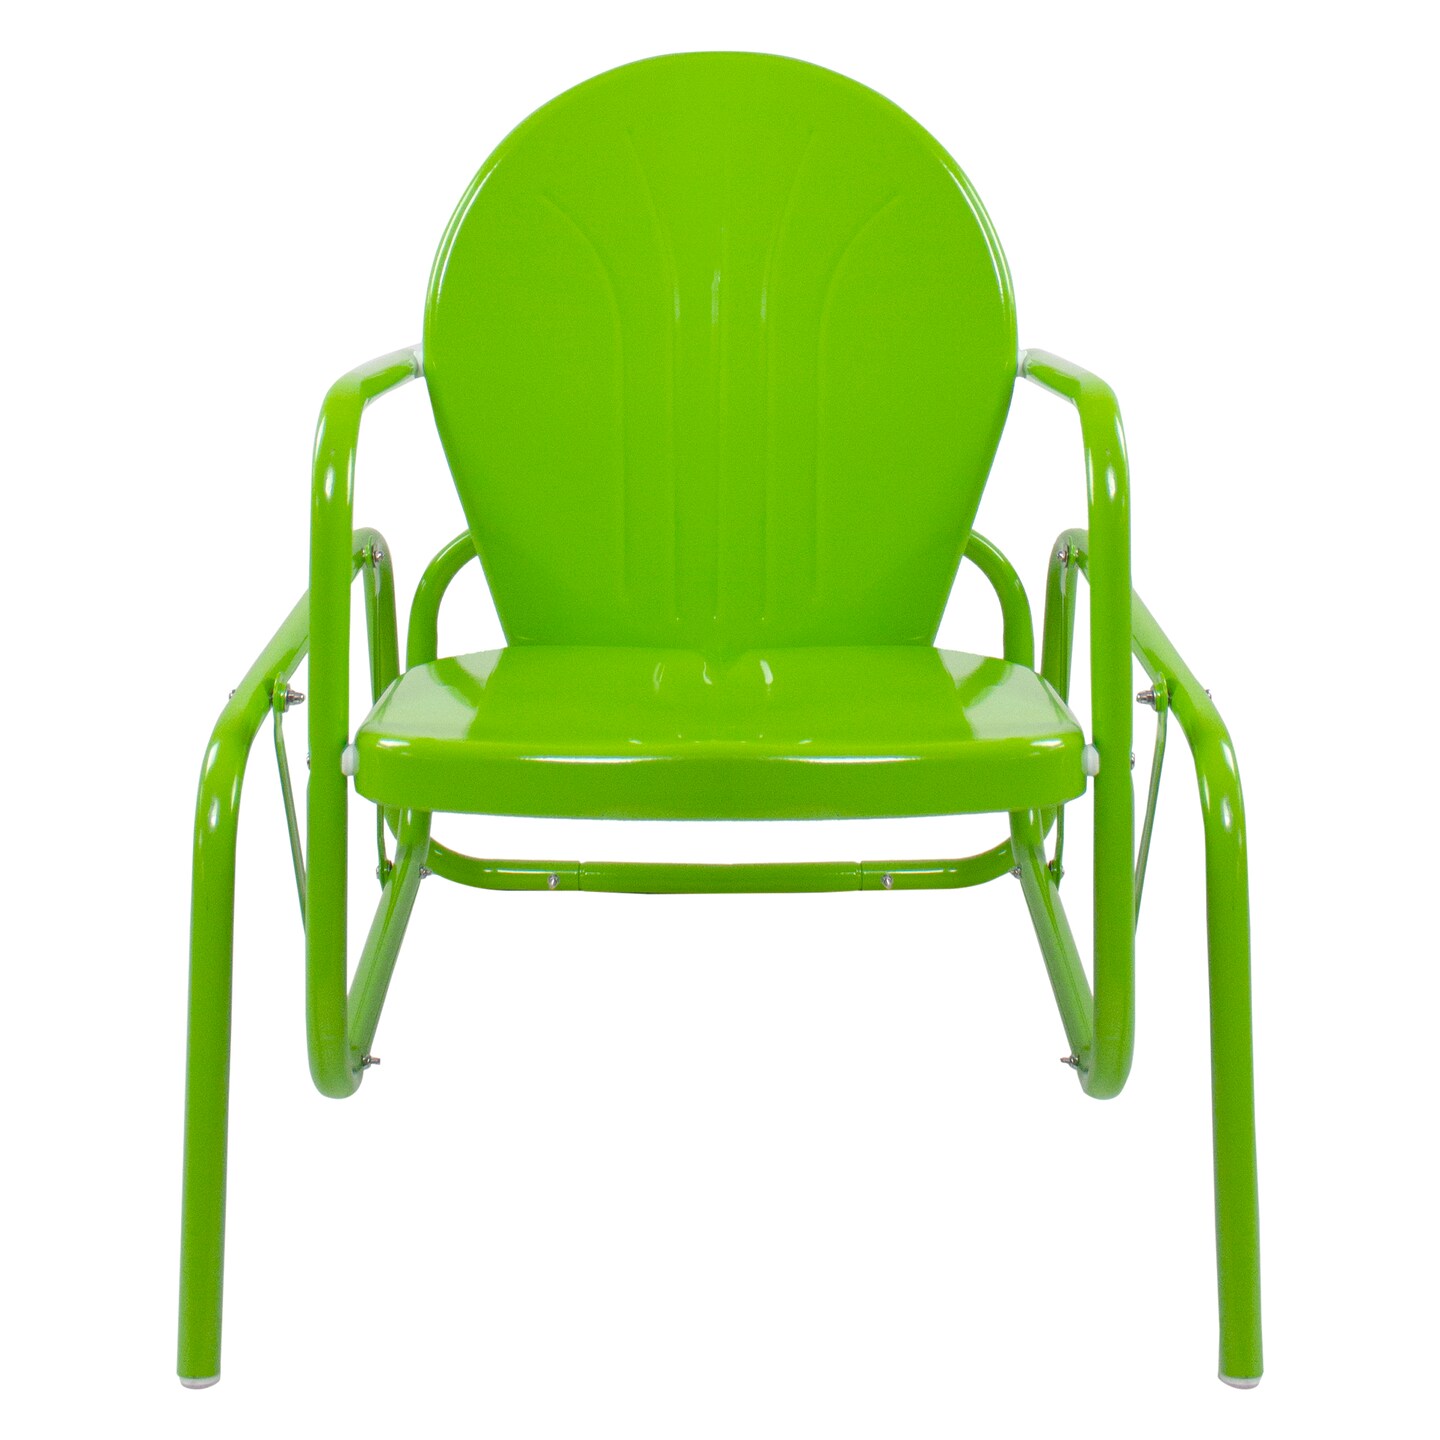 Northlight Outdoor Retro Metal Tulip Glider Patio Chair, Lime Green